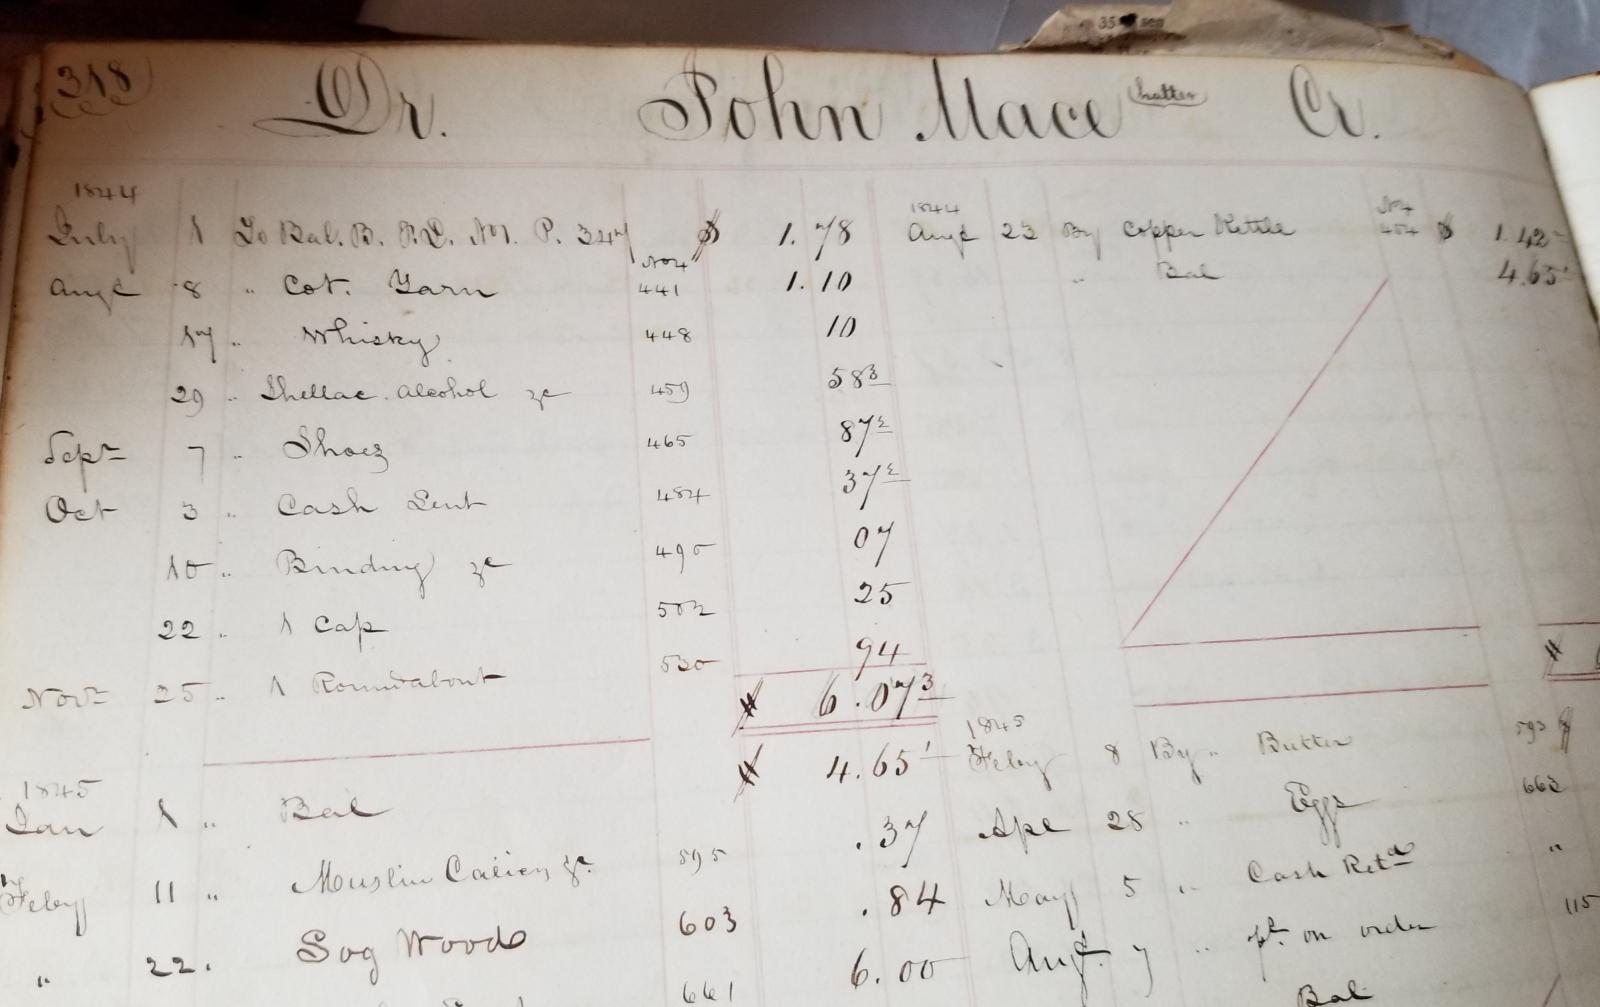 Page from William Weigley's store ledger. Historic Schaefferstown, Inc.